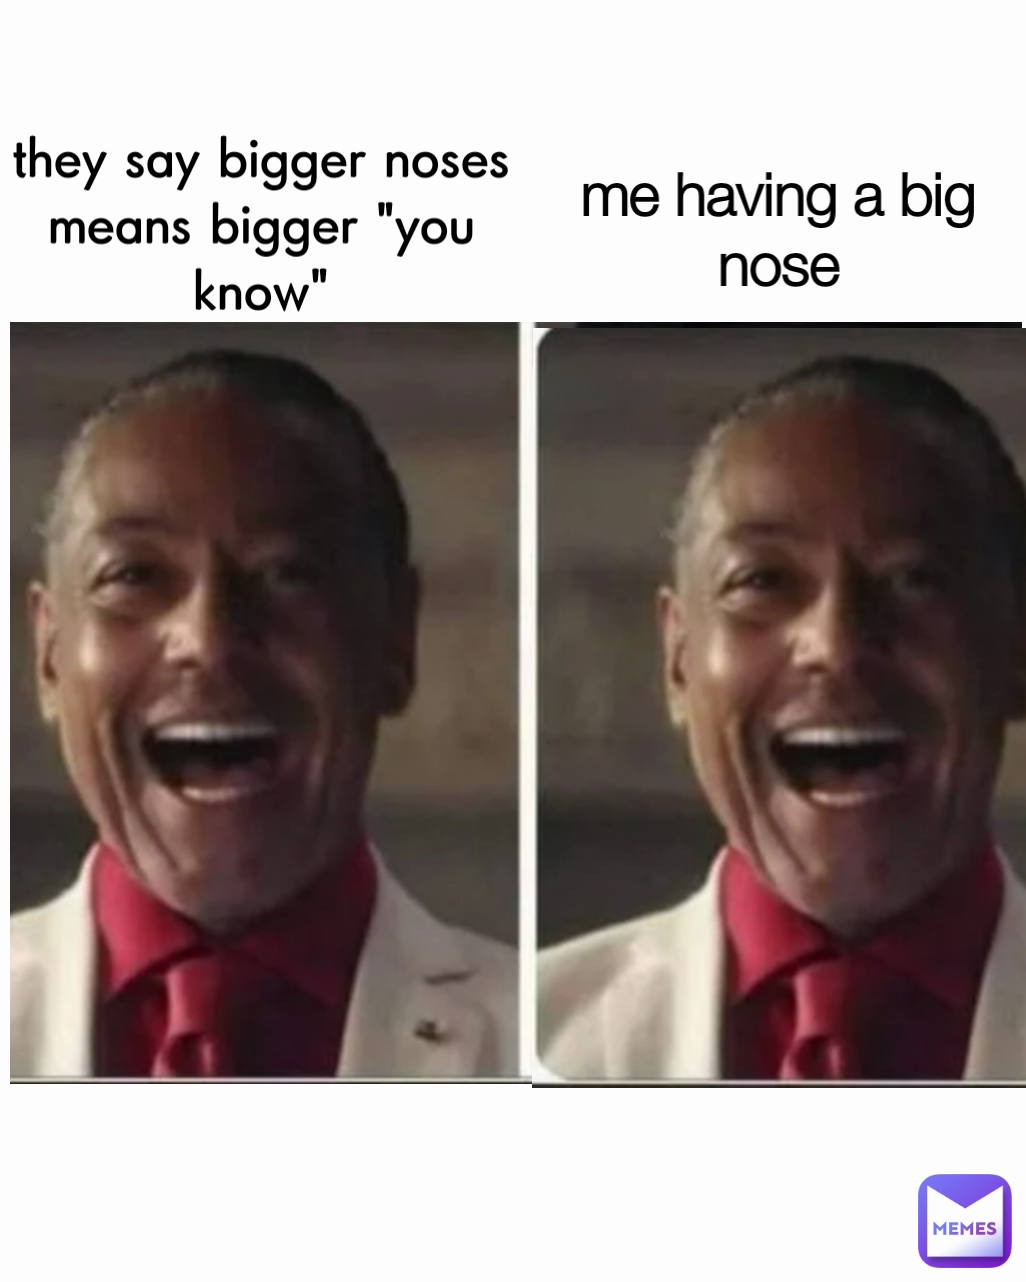 they say bigger noses means bigger "you know" me having a big nose